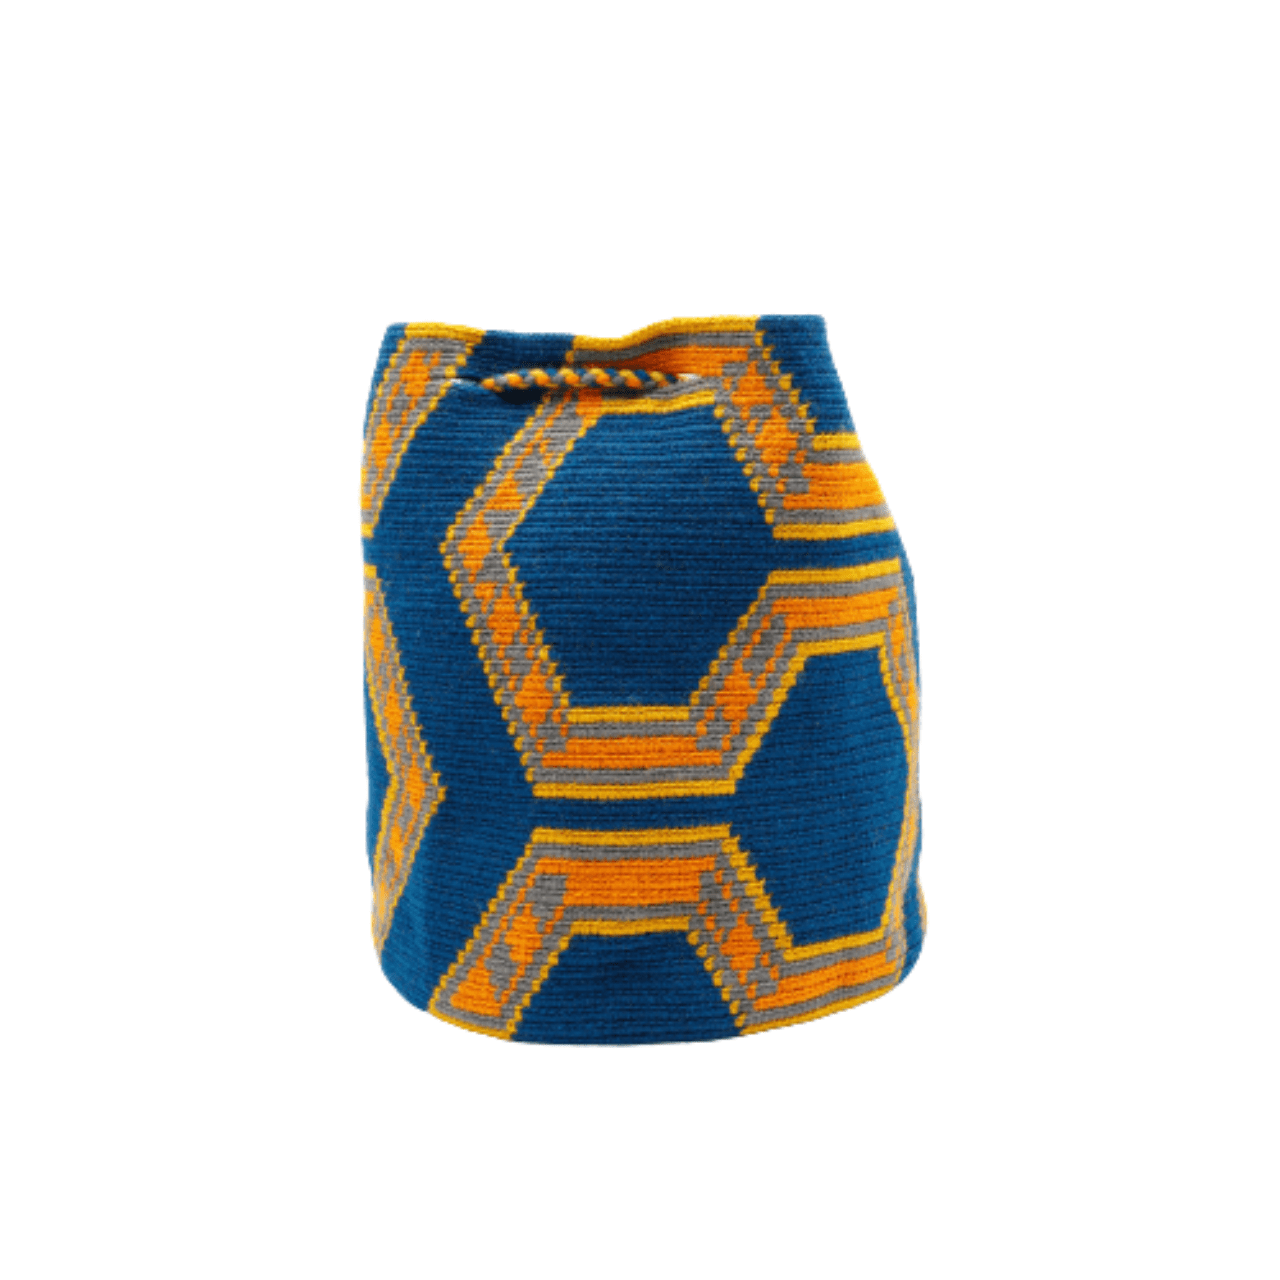 Valeria Wayuu Bag in Blue Ocean with Orange, Gray, and Yellow - Bold and Attractive Design - Handcrafted Beauty and Vibrant Colors